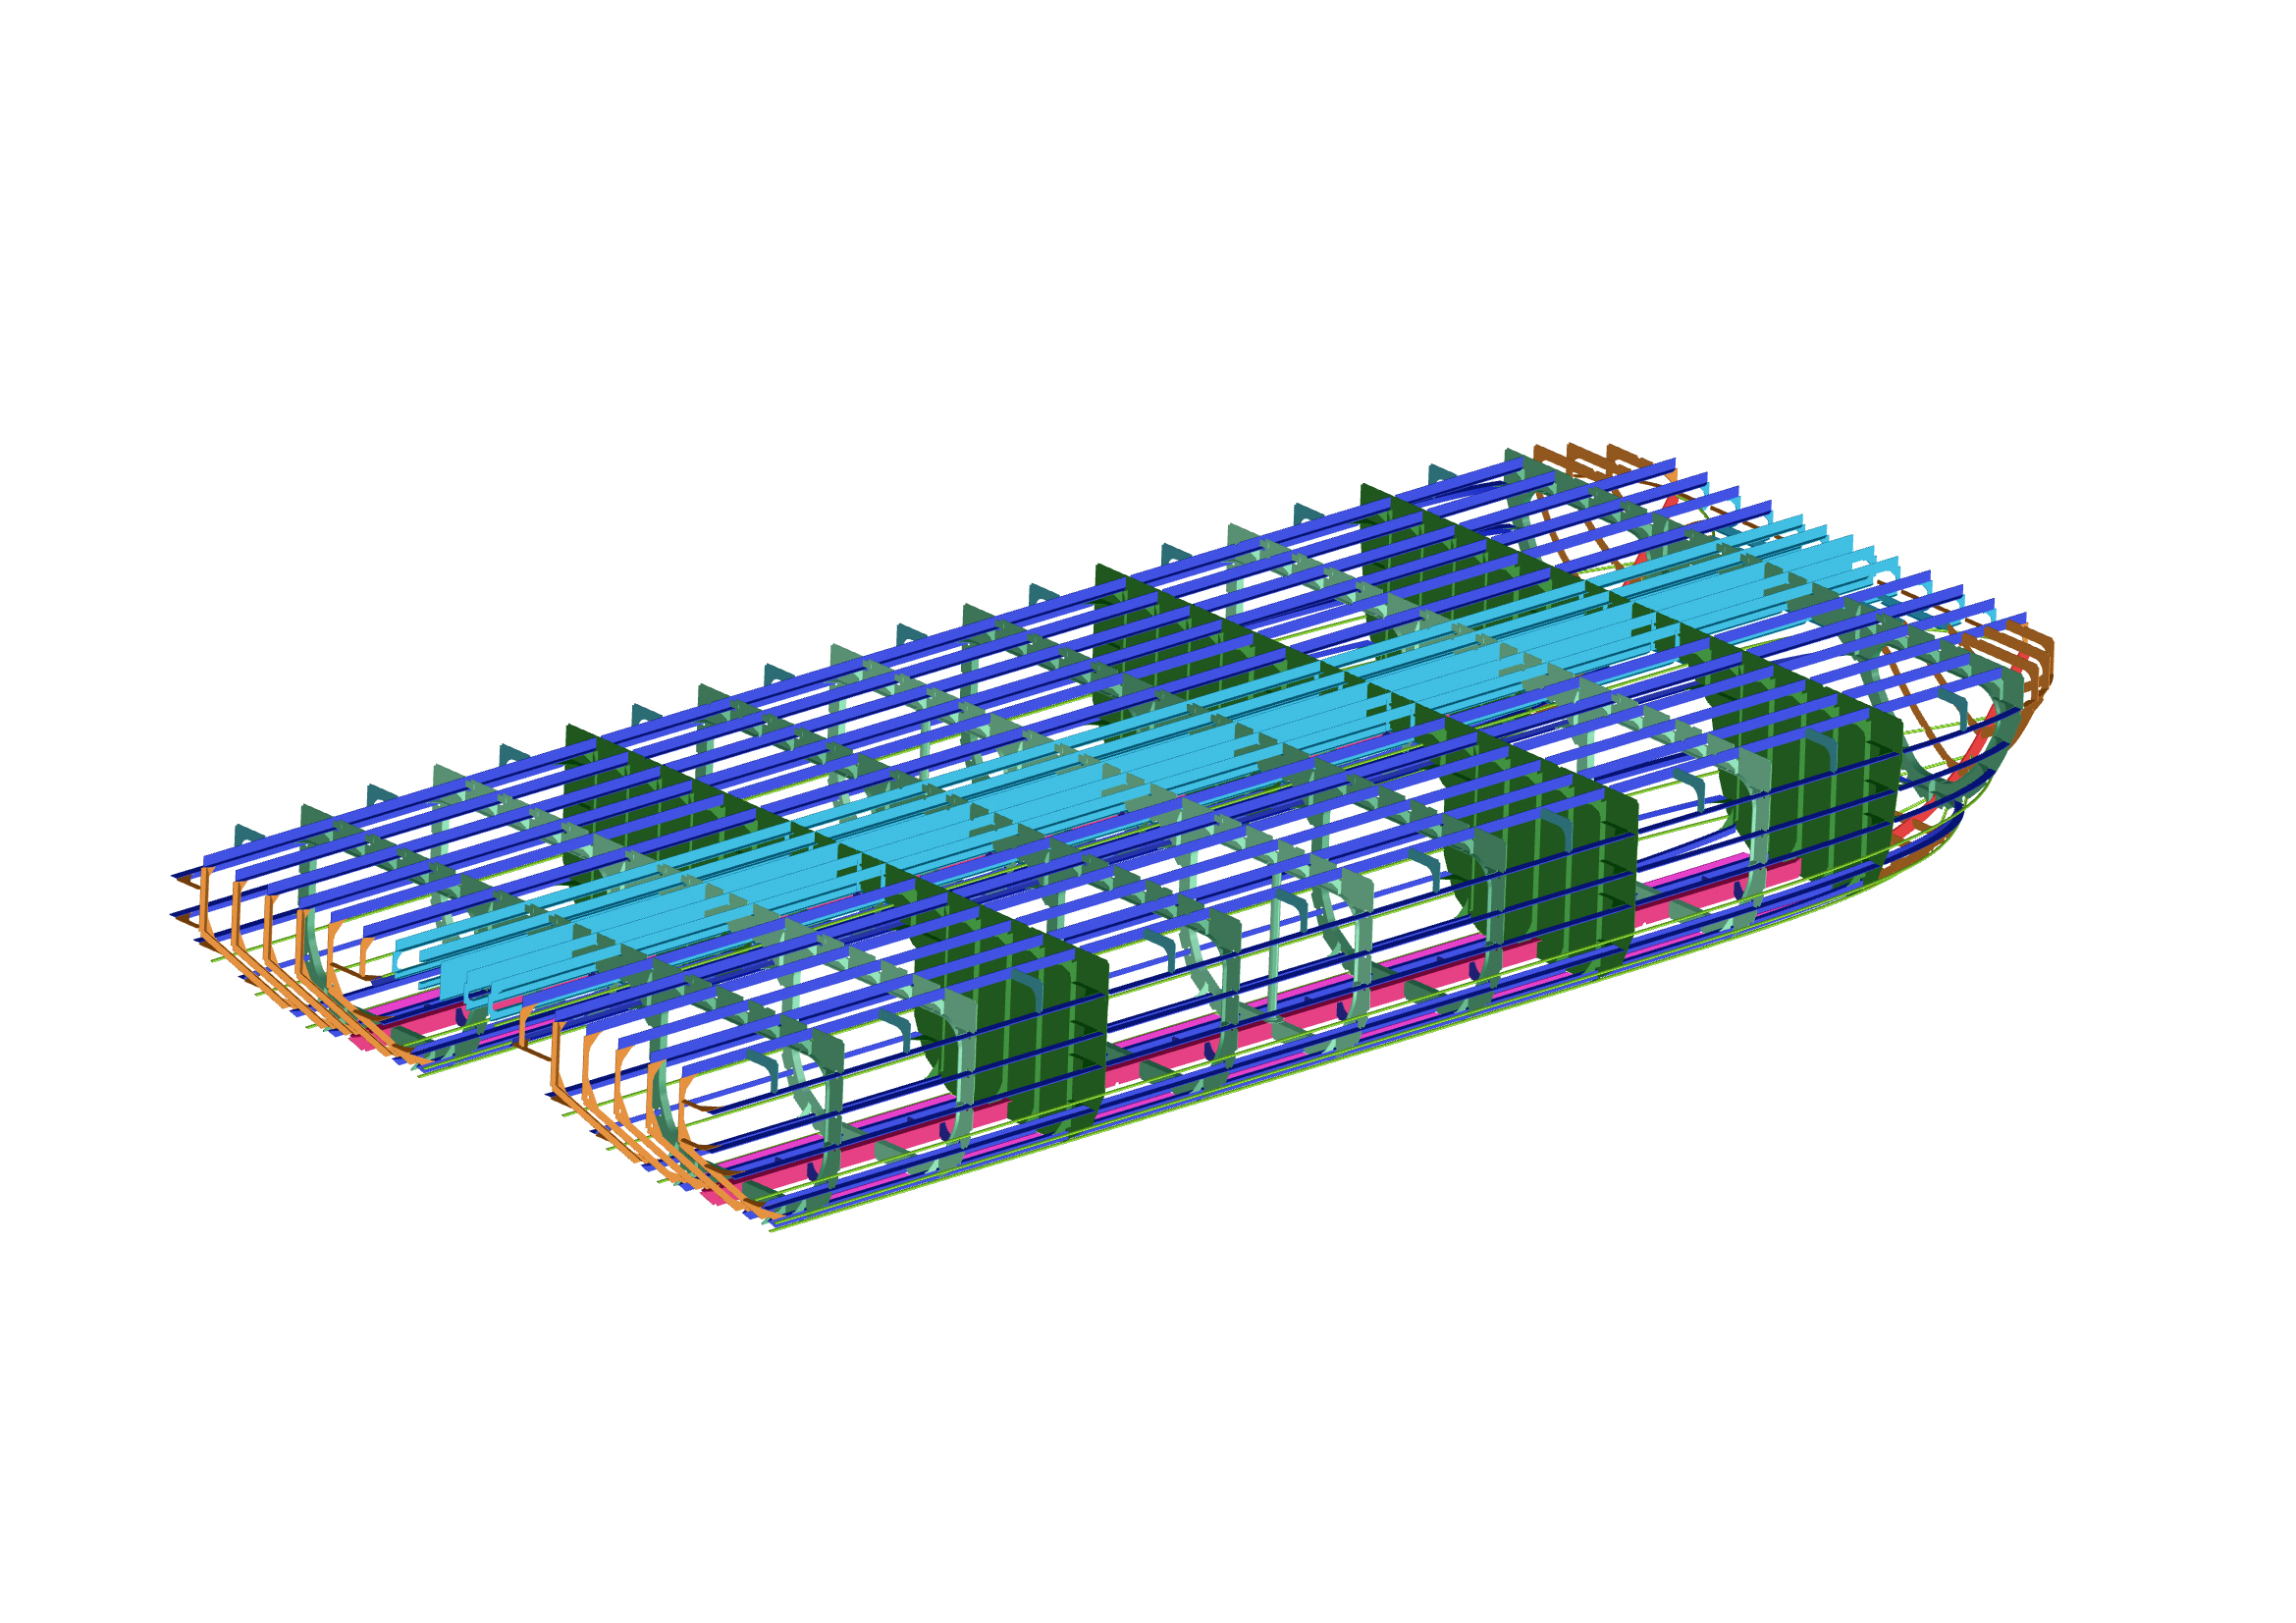 Hull 3D Structure Model